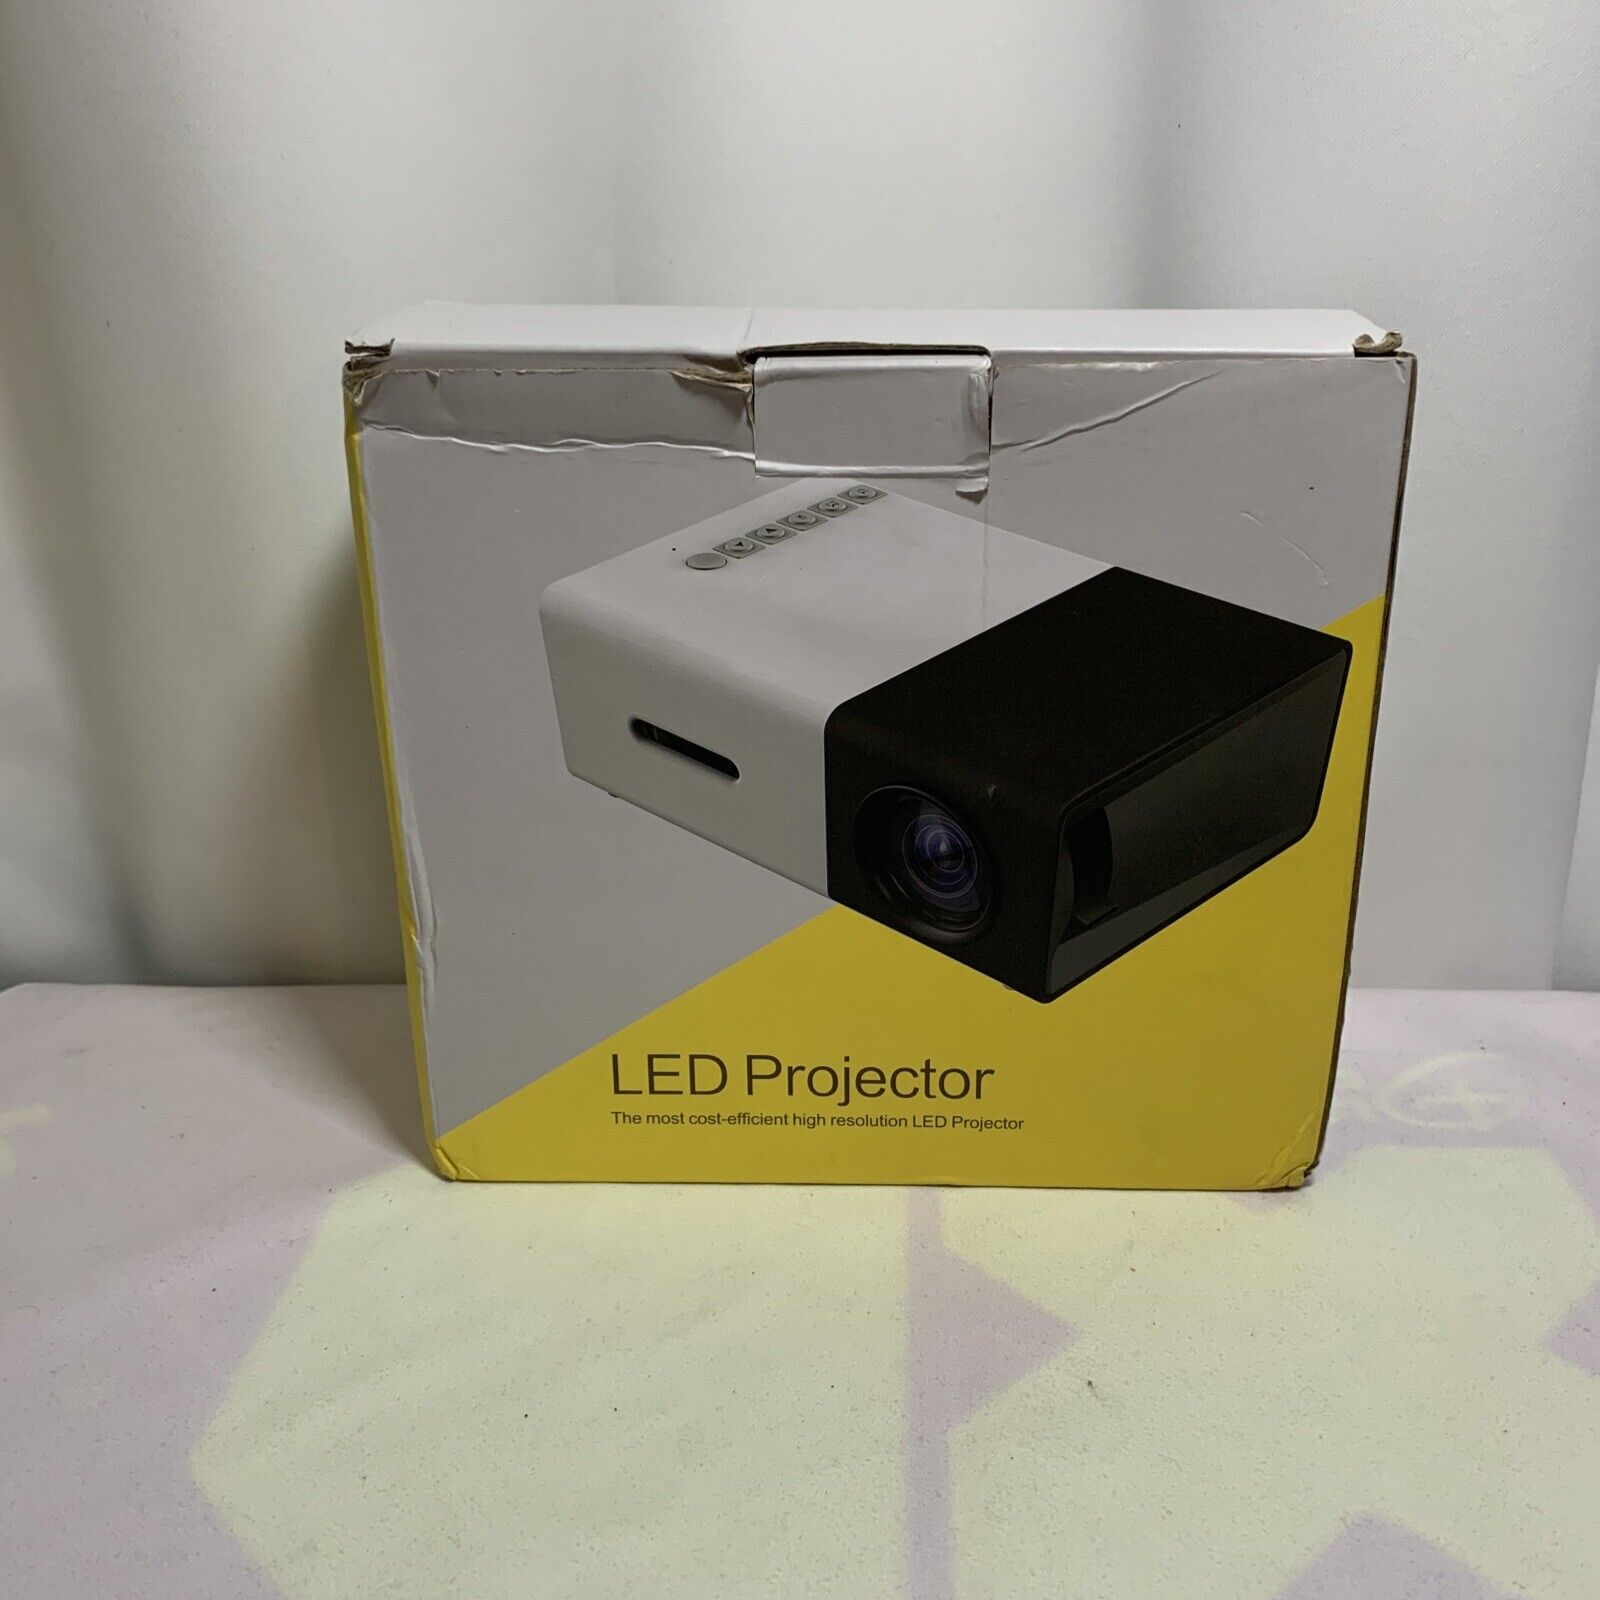 PVO Mini Projector 1080P Full HD Portable Movie Outdoor , Multimedia Connection